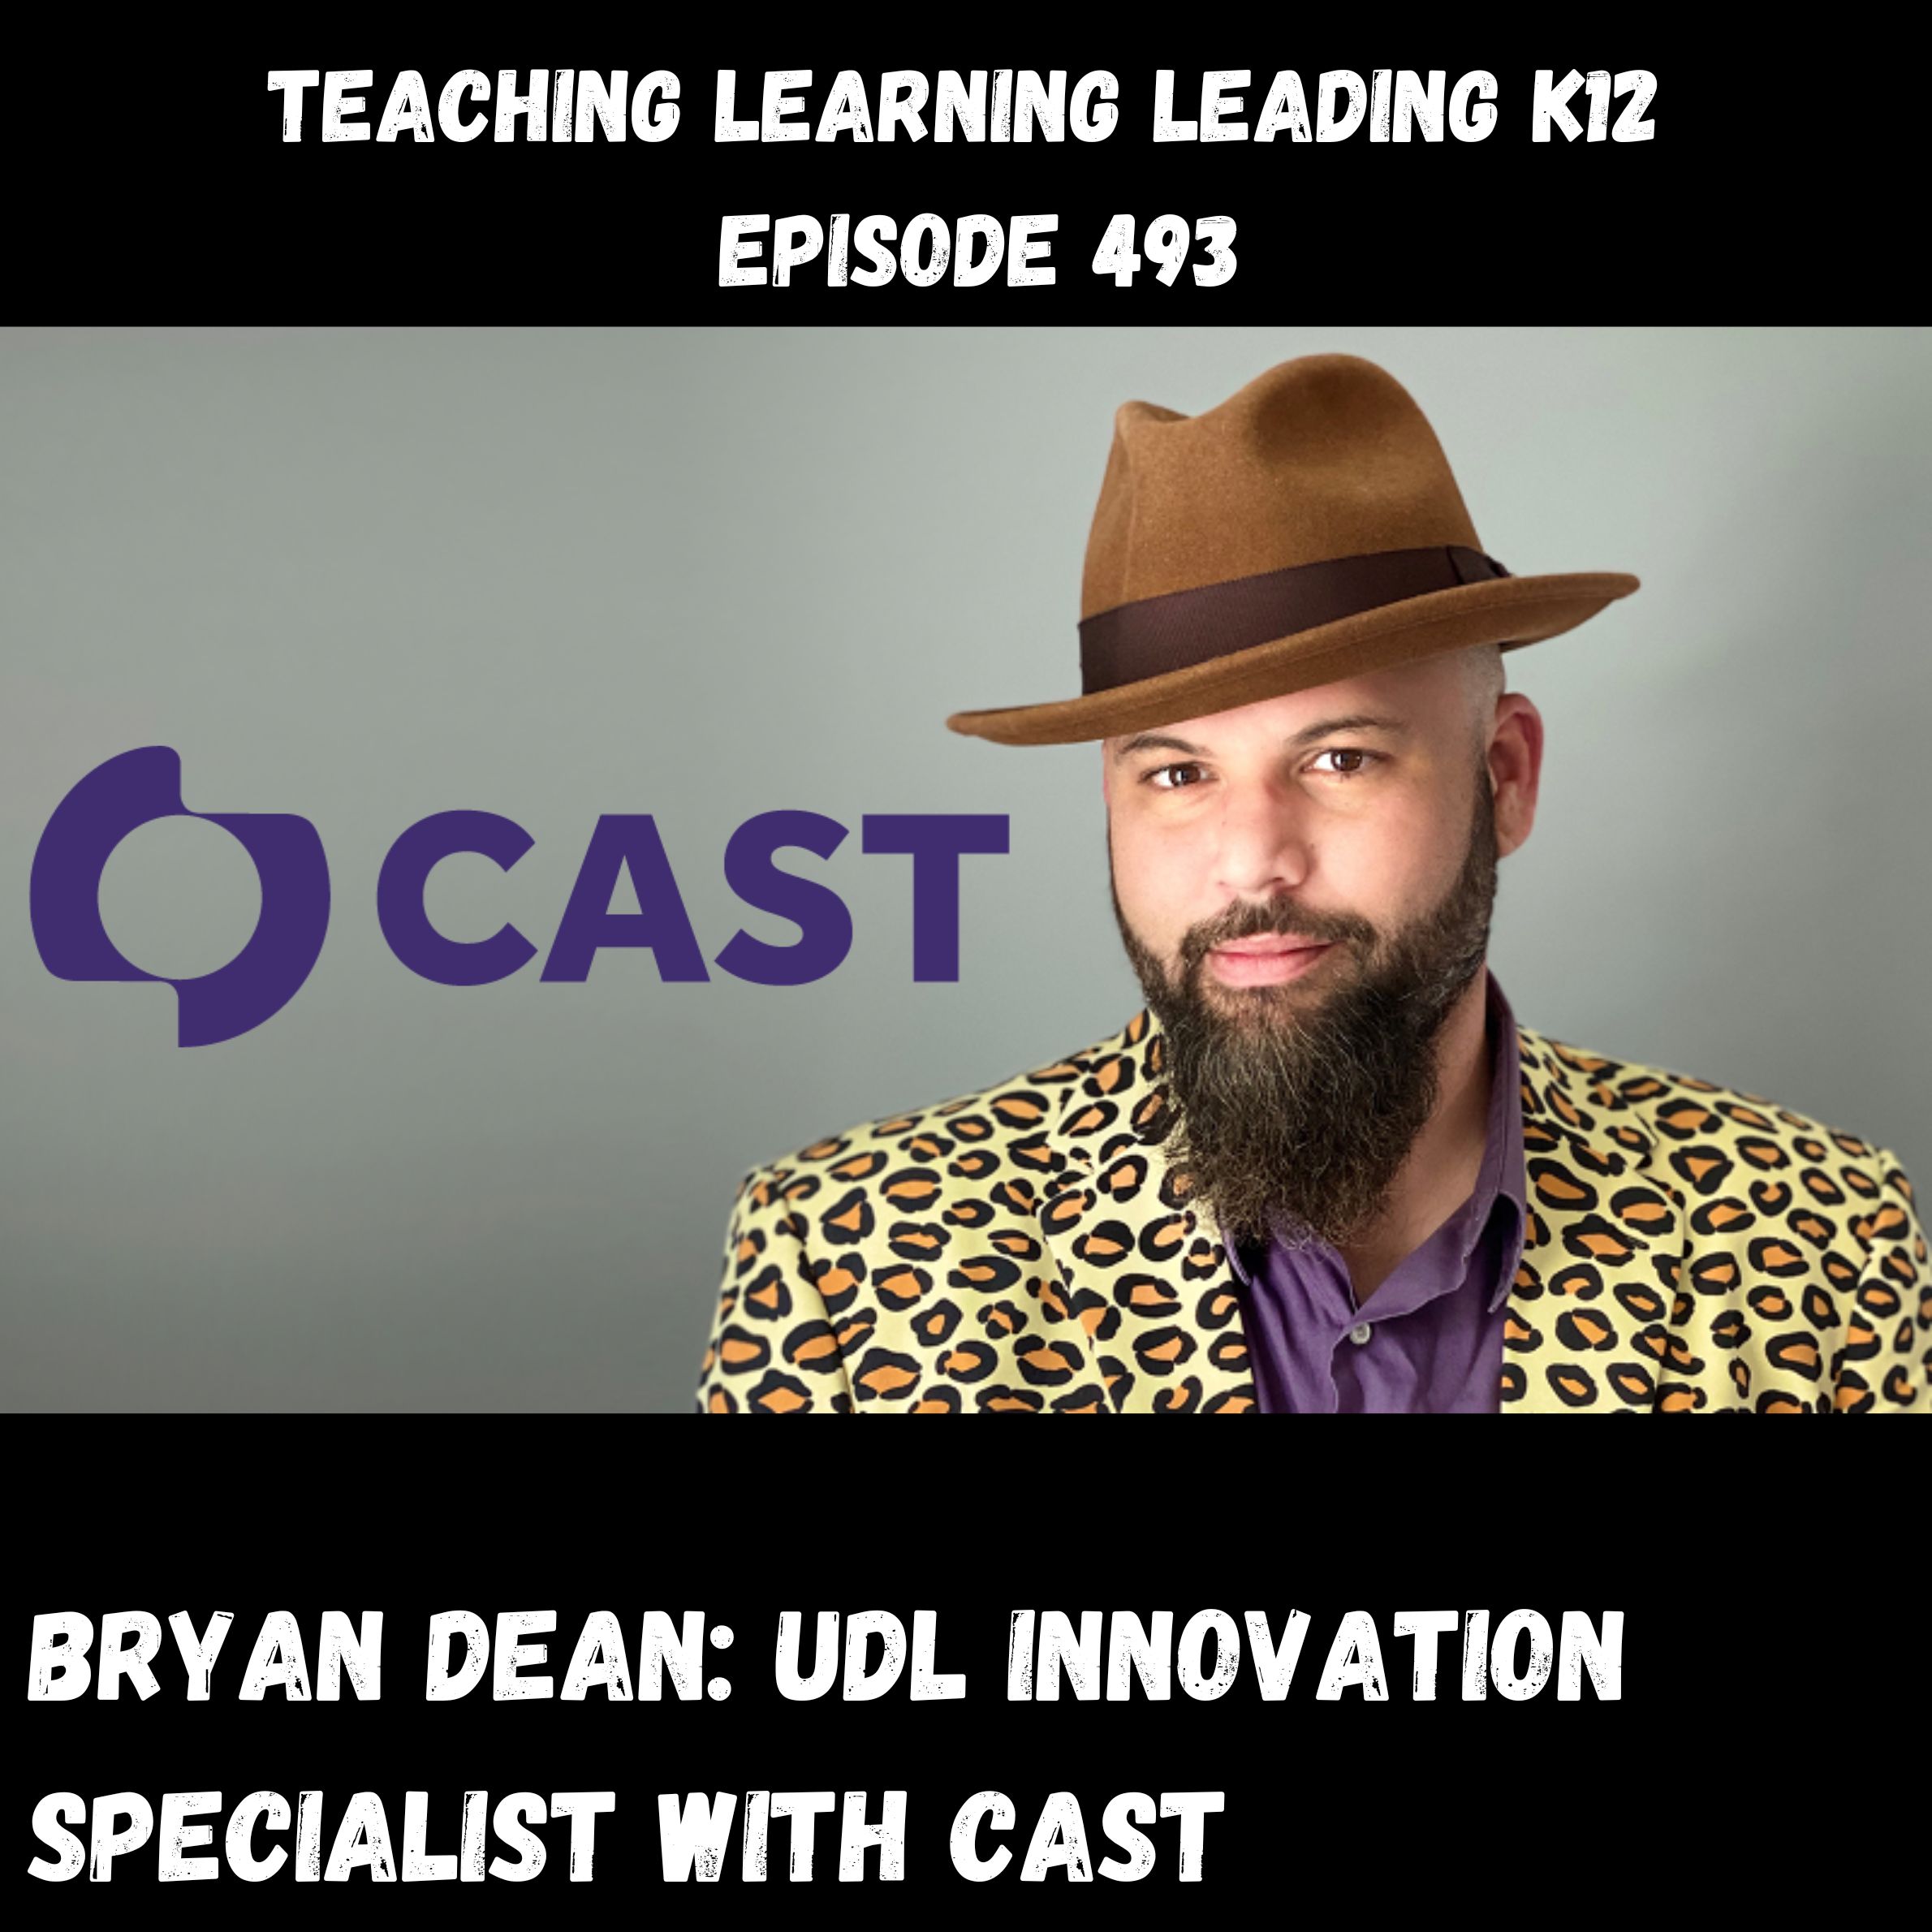 Bryan Dean: UDL Innovation Specialist with CAST - 493 Image